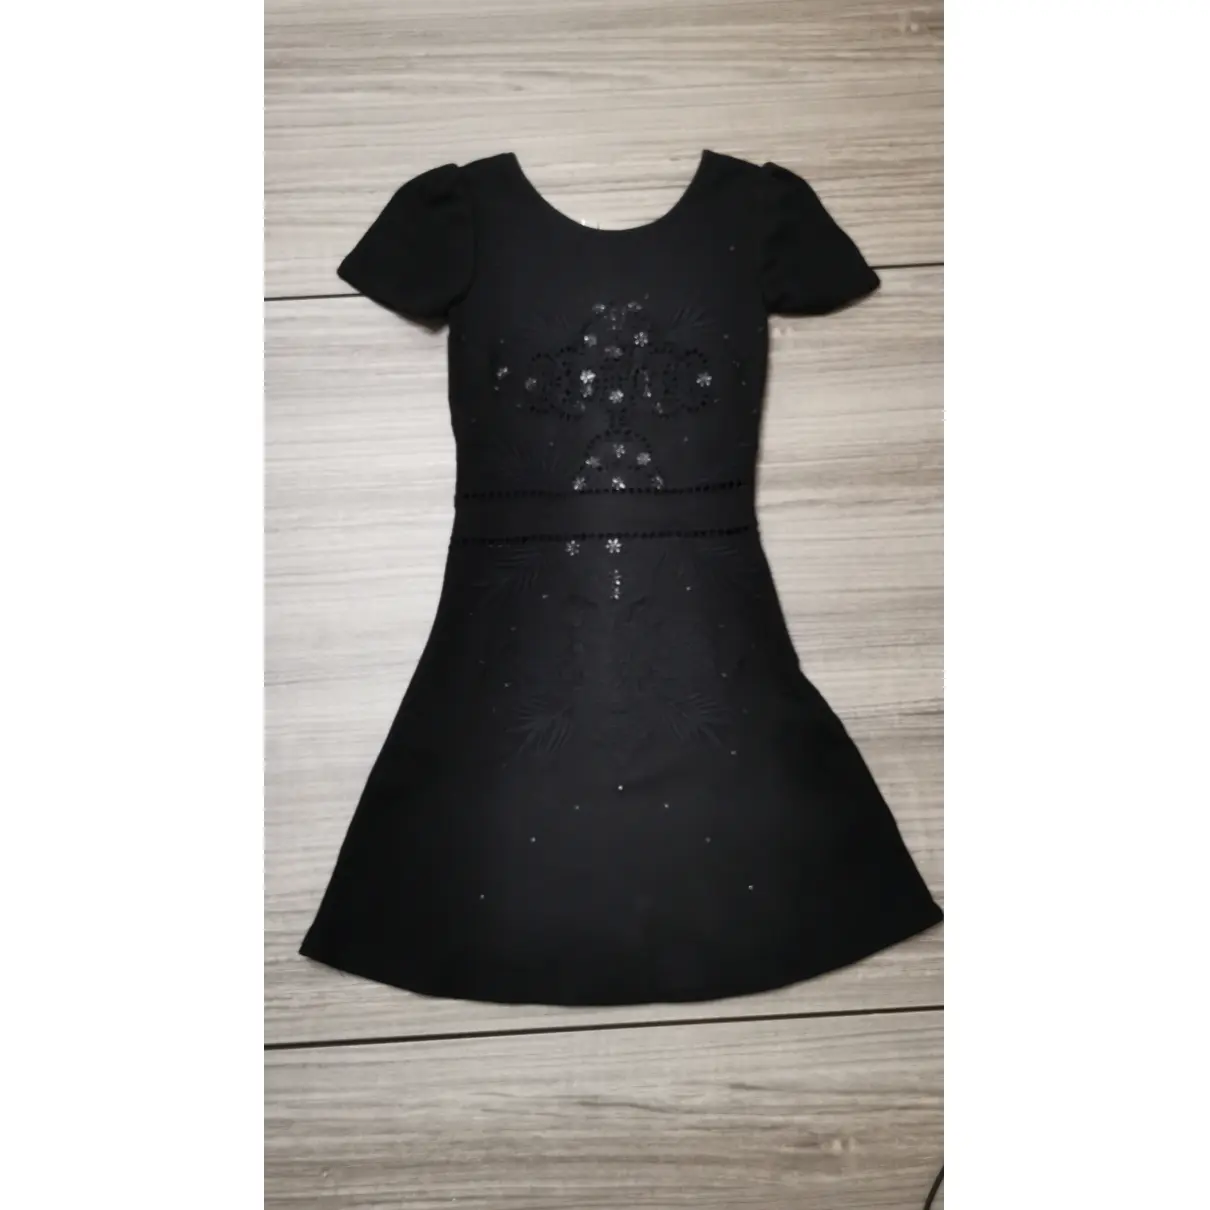 Buy French Connection Mid-length dress online